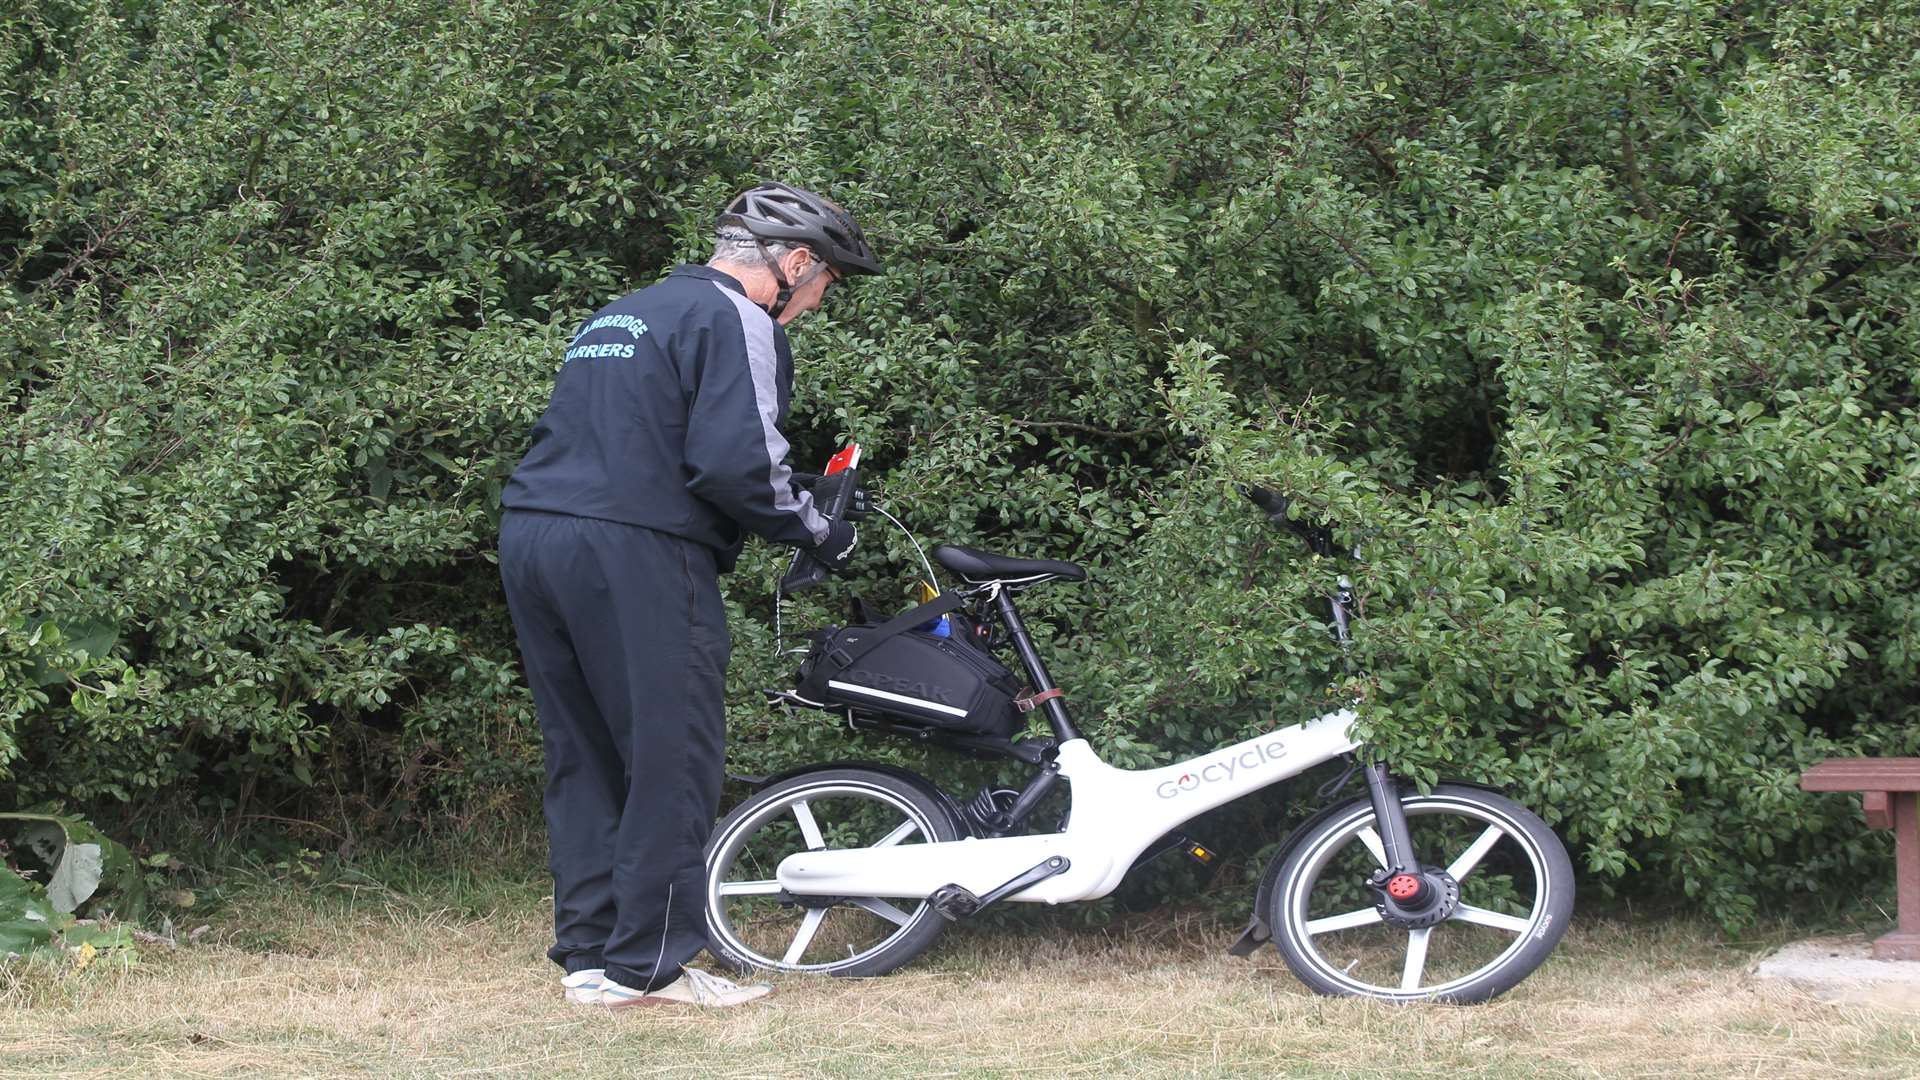 Warwick Dixon travels on his electric bicycle to a local park with his hammer on the back